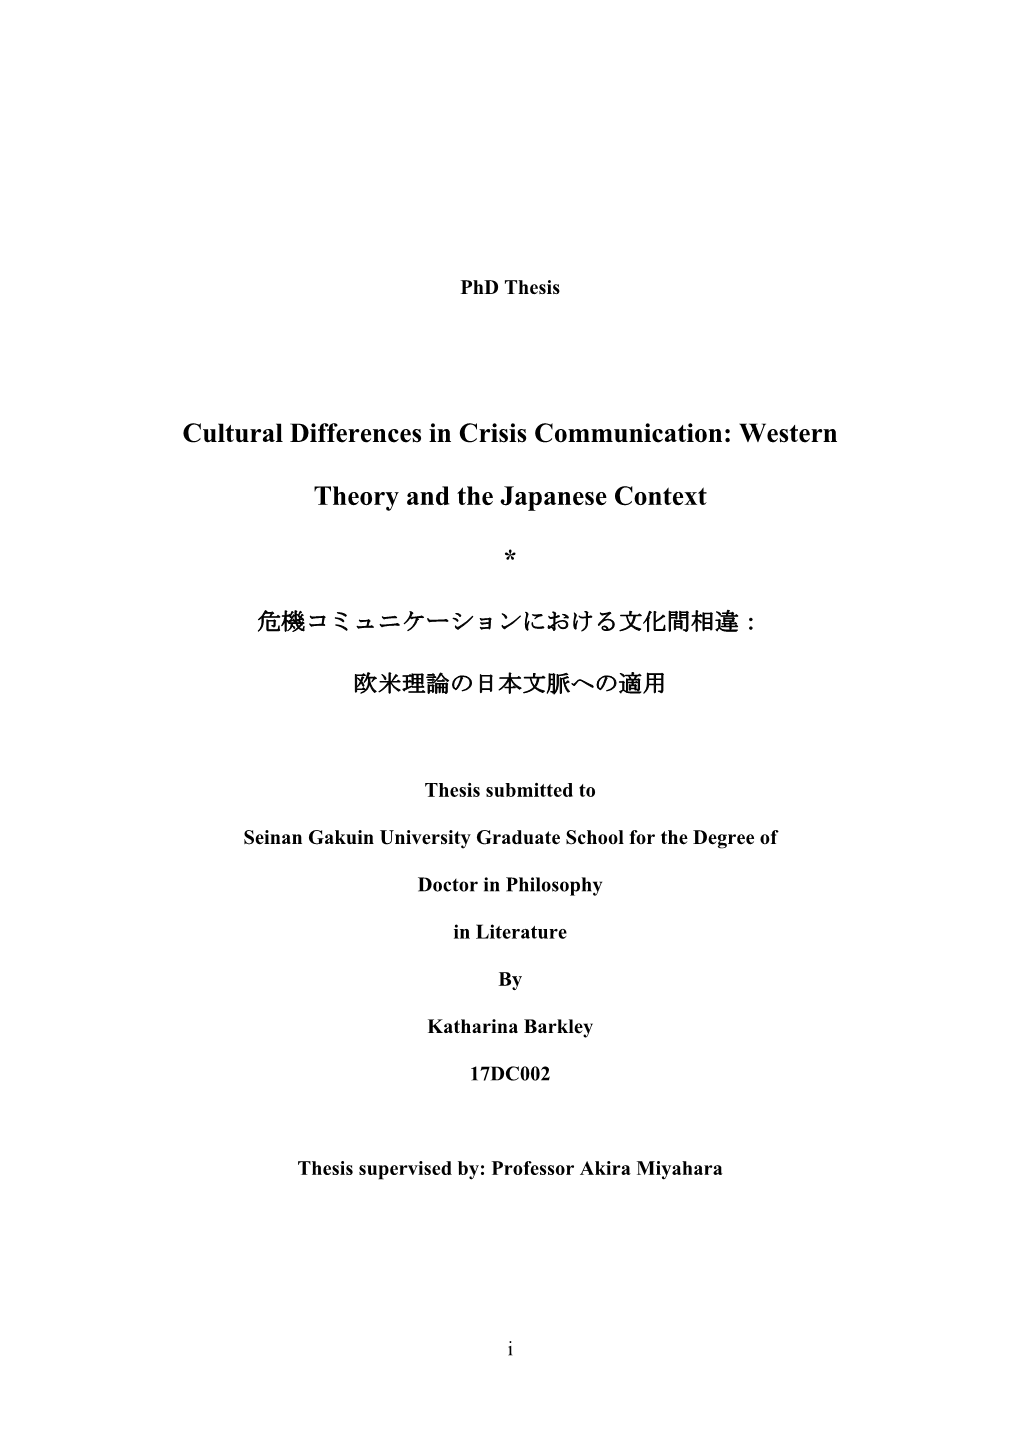 Cultural Differences in Crisis Communication: Western